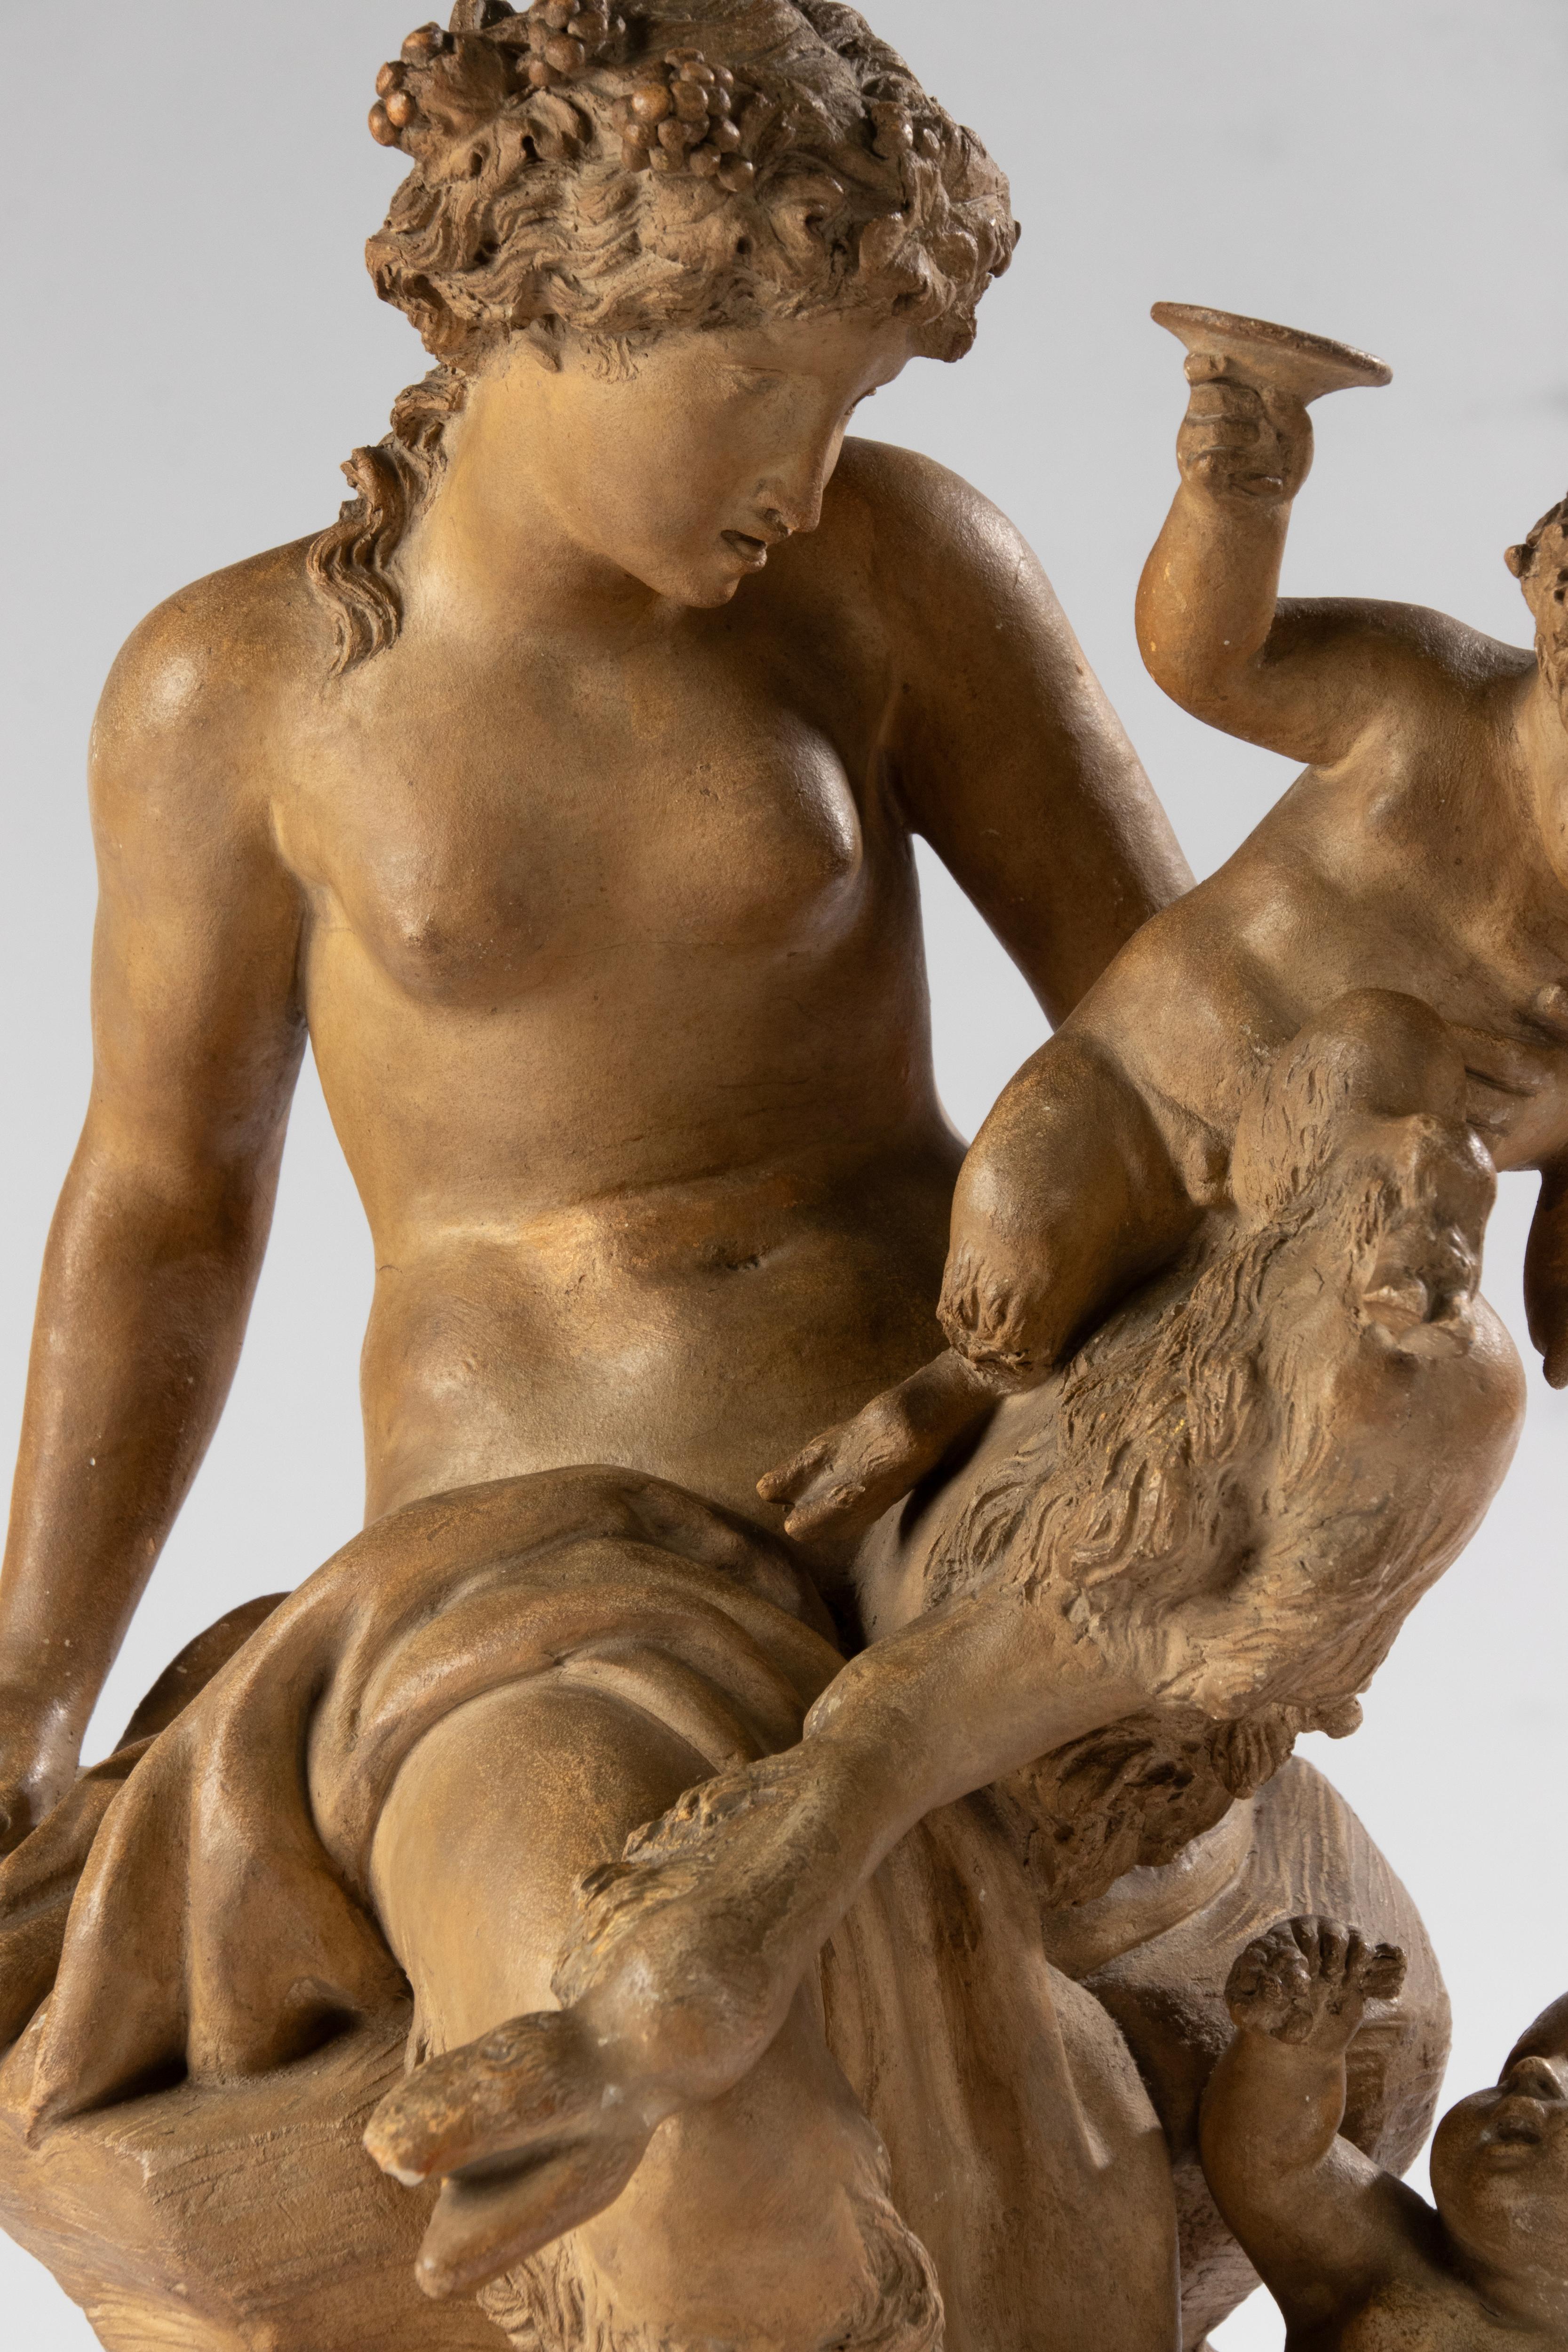 A fine quality French mythological terracotta sculpture, after Clodion (Claude Michel Clodion 1738 - 1814), depicting a young female faun/satyr playing with two Bacchante cherubs, one holding a goblet, surrounded by vine leaves. Signed on the plinth